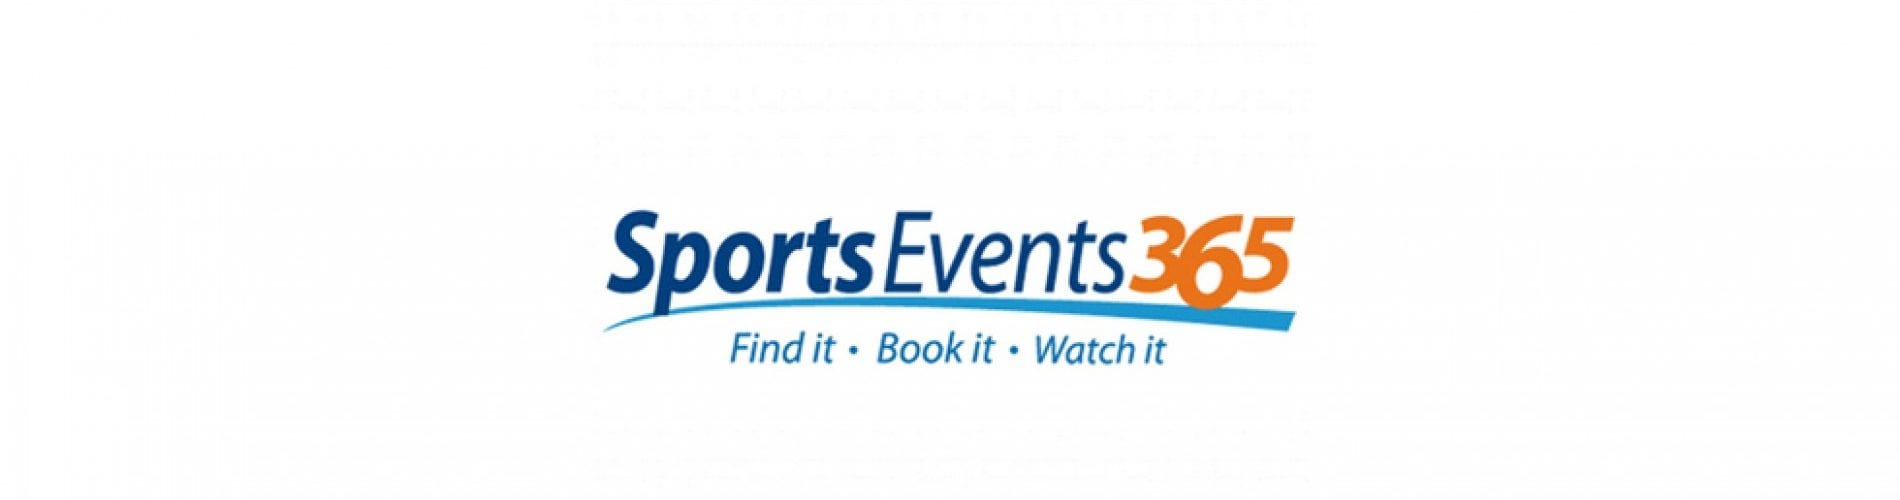 Sports Events 365 Is The World's First Hybrid Website For Sports, Music